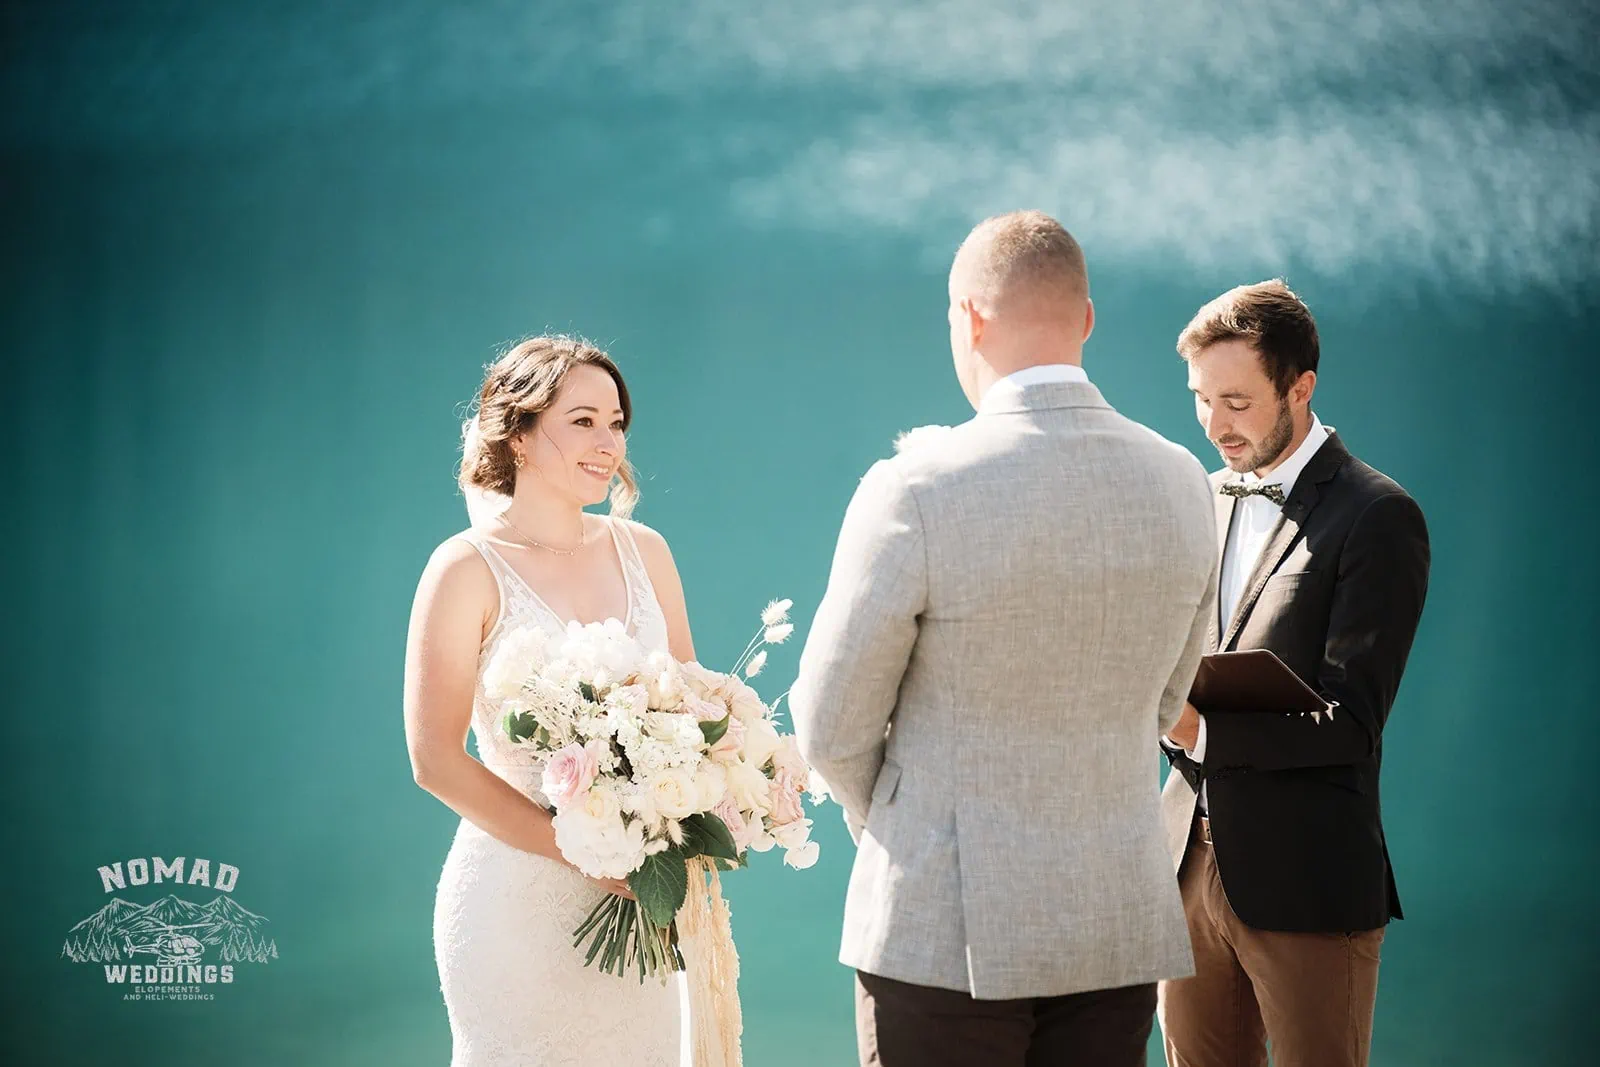 Amy & Eden exchange vows in front of Enchanting Lake Erskine.